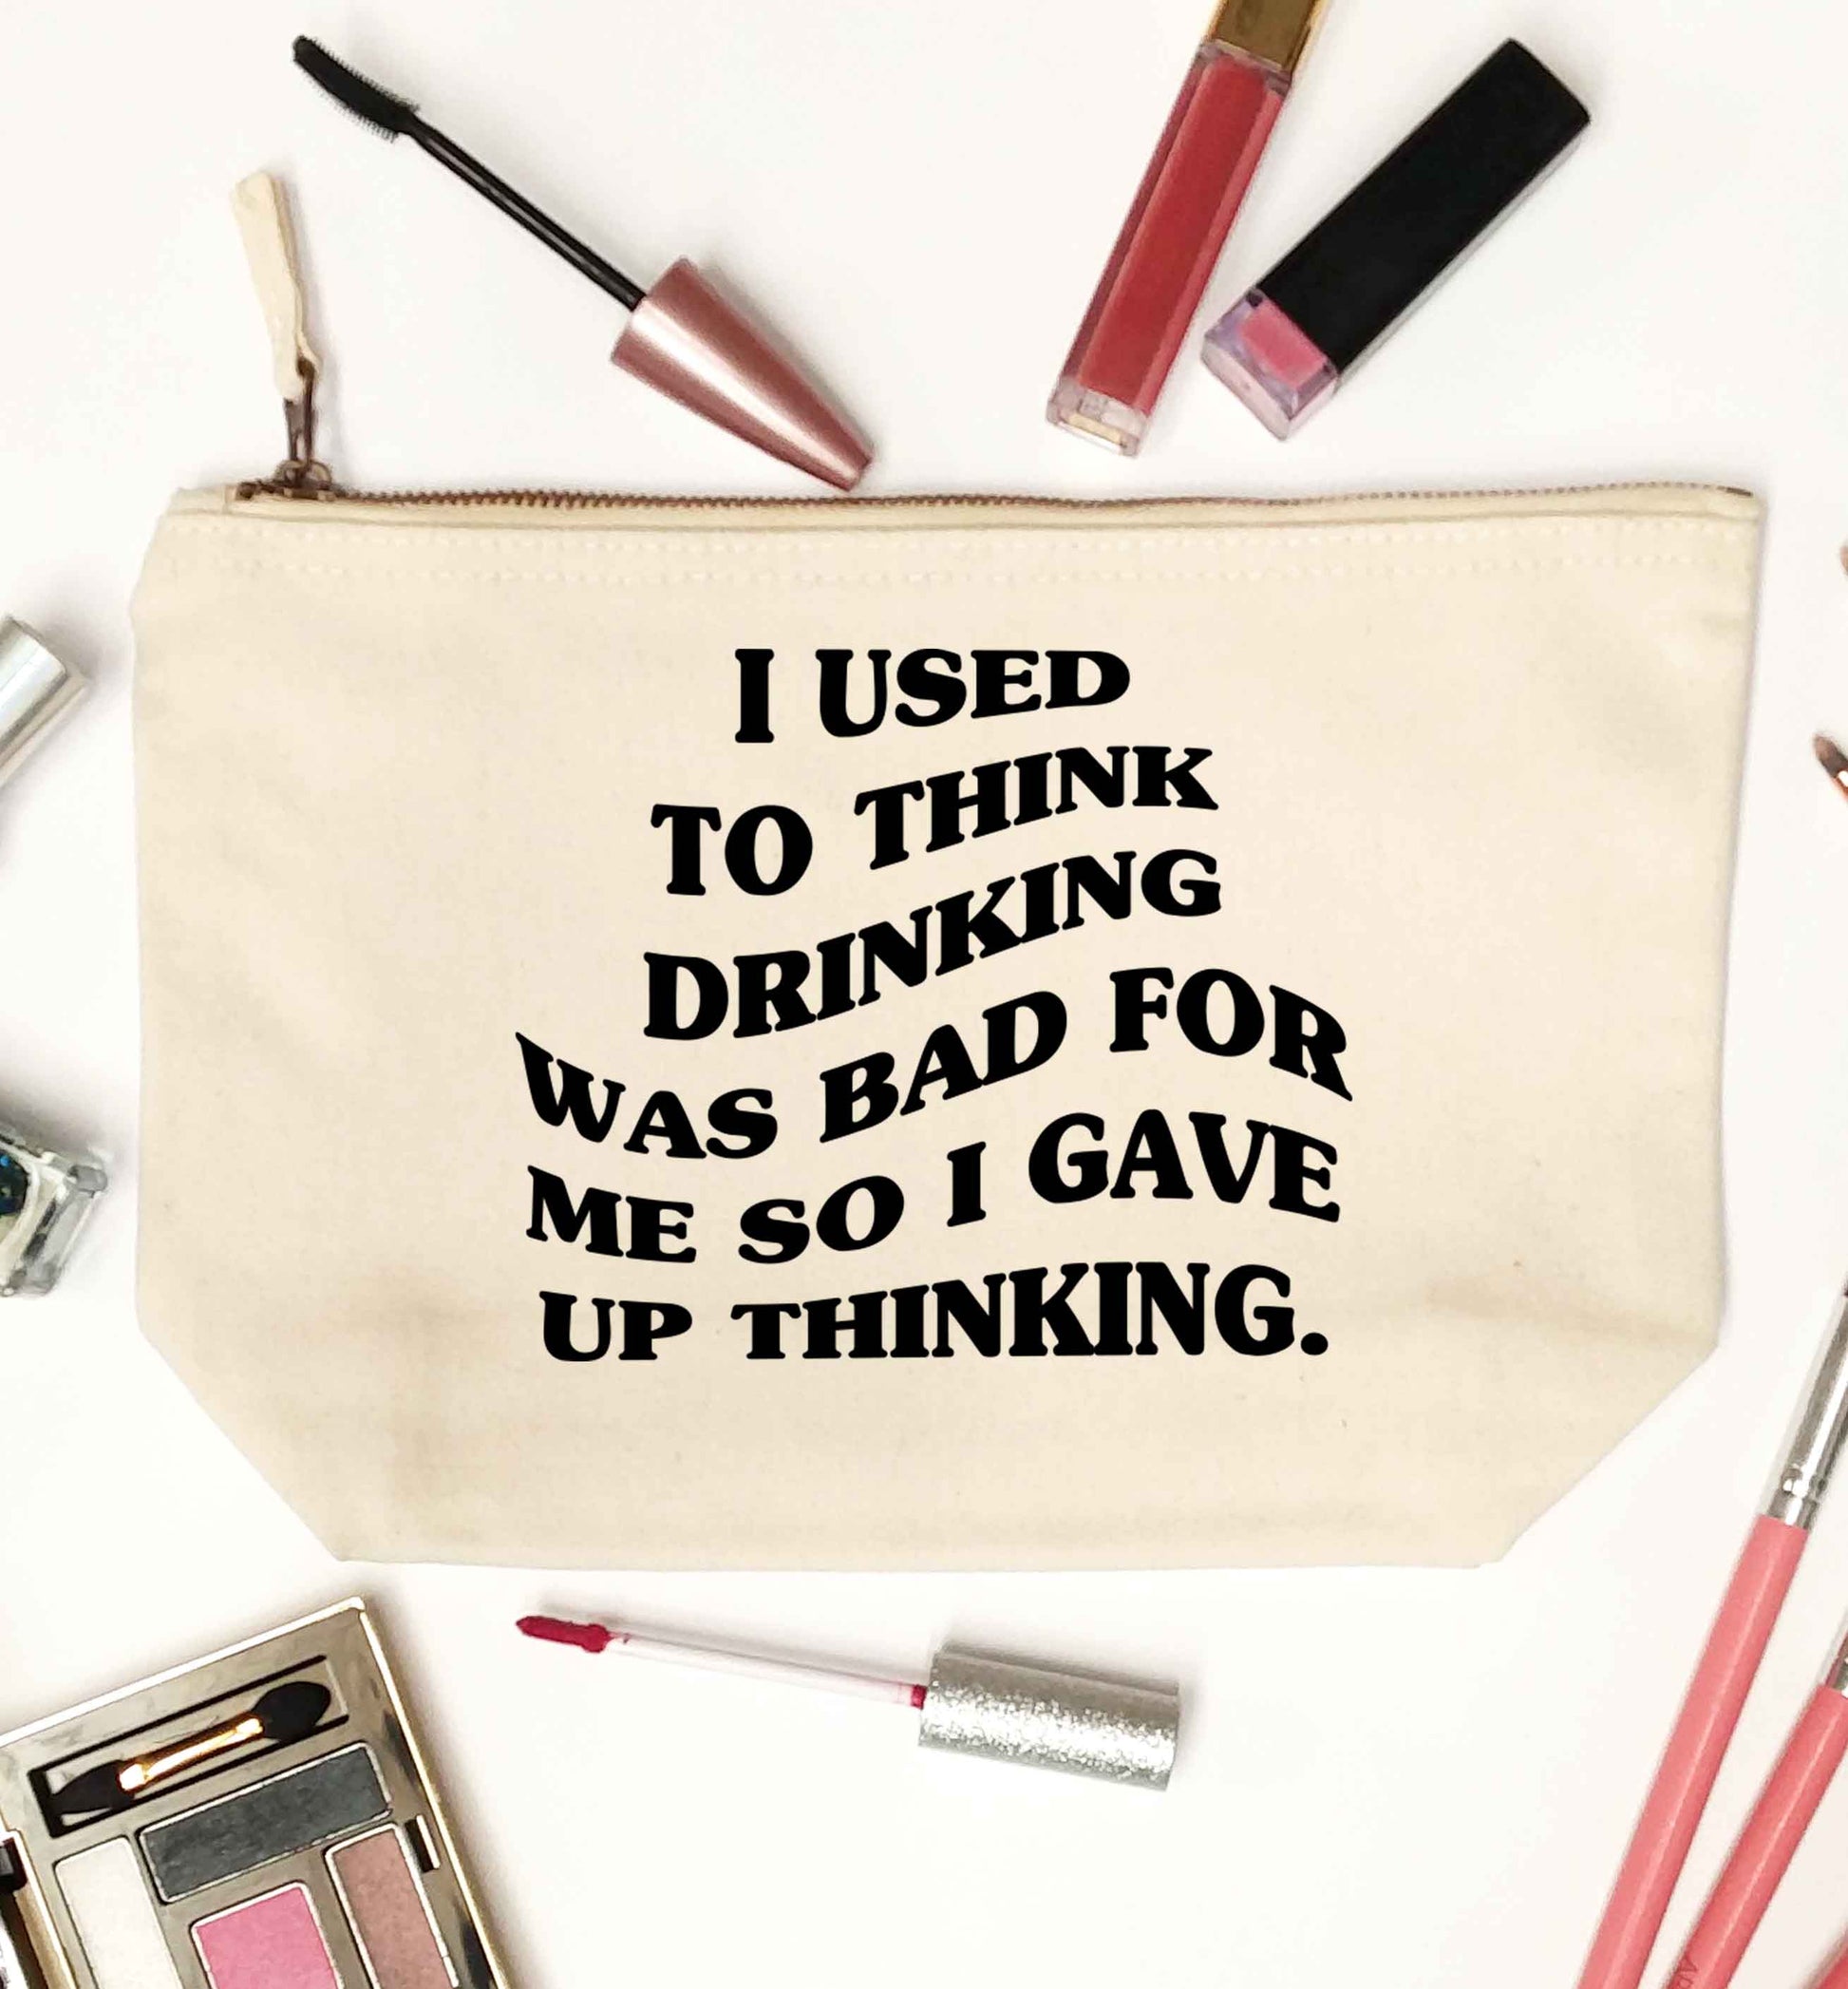 I used to think drinking was bad so I gave up thinking natural makeup bag